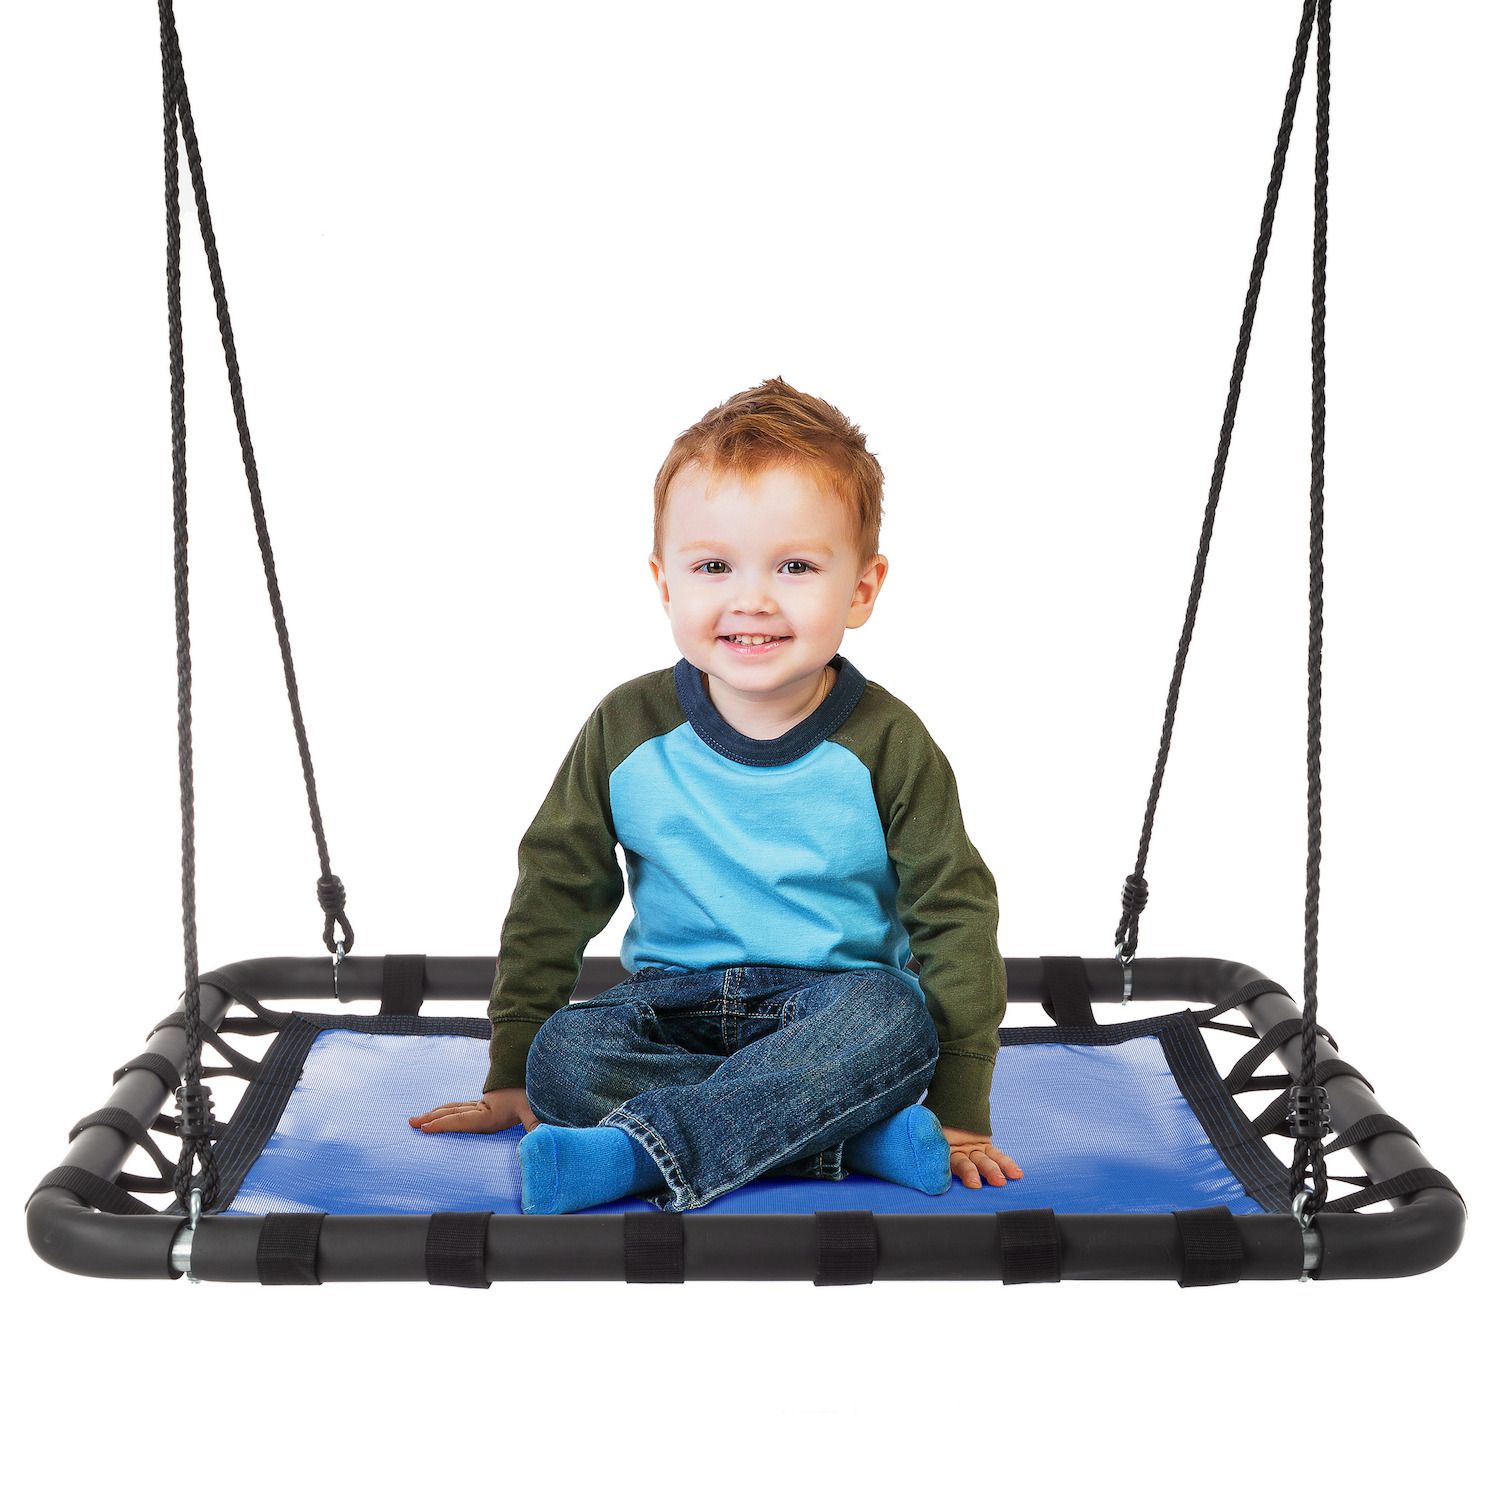 Image for Hey! Play! Hanging Outdoor Tree or Playground Equipment Platform Standing Swing at Kohl's.